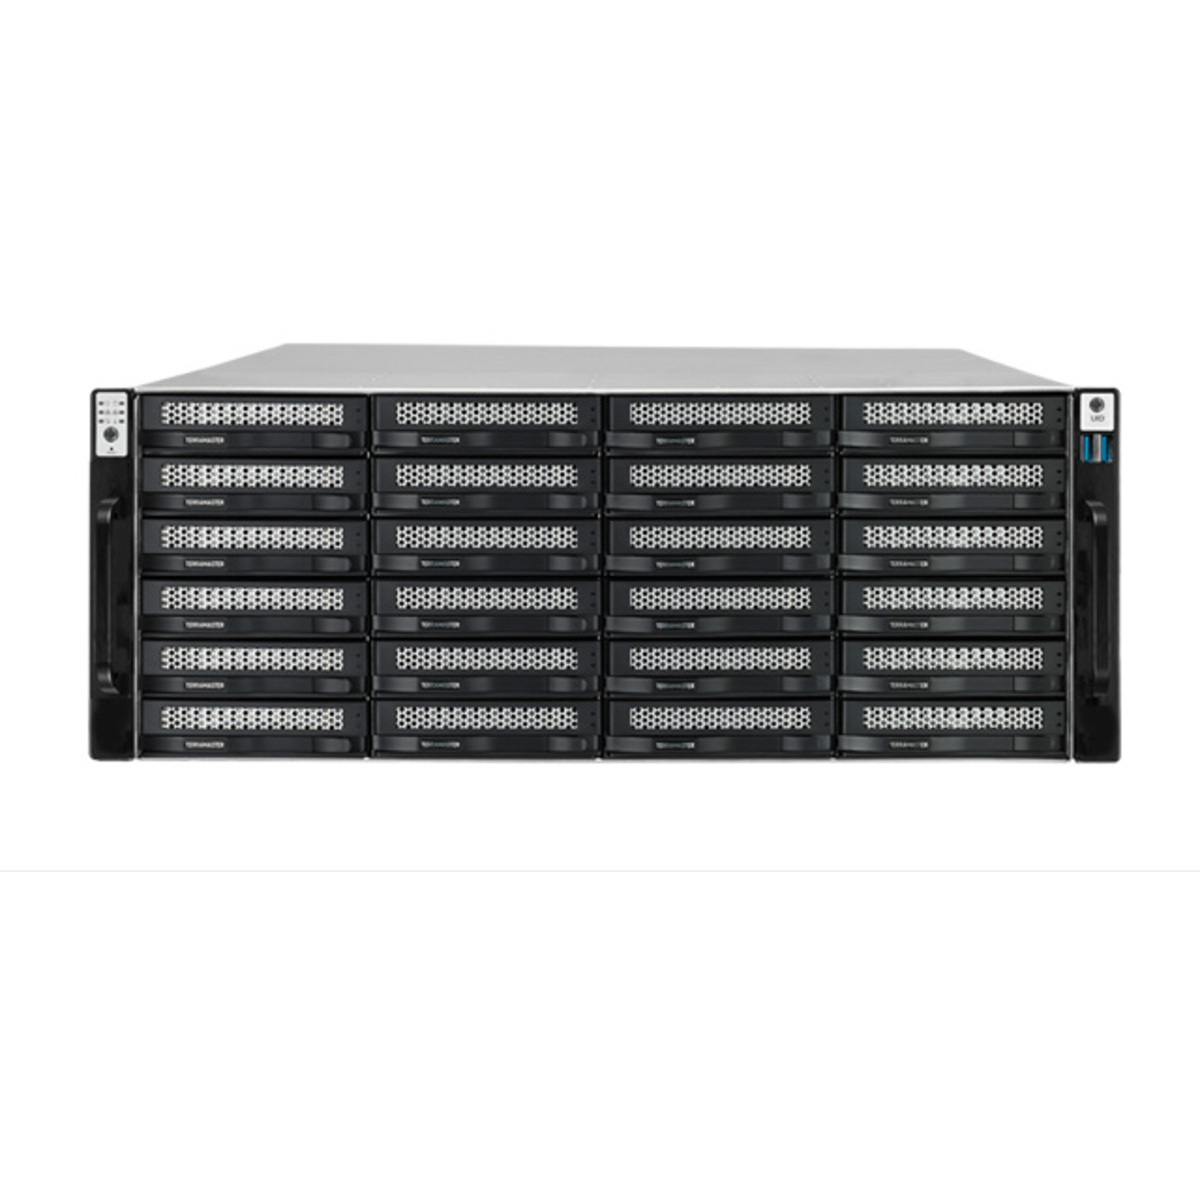 TerraMaster U24-722-2224 306tb 24-Bay RackMount Large Business / Enterprise NAS - Network Attached Storage Device 17x18tb Western Digital Red Pro WD181KFGX 3.5 7200rpm SATA 6Gb/s HDD NAS Class Drives Installed - Burn-In Tested U24-722-2224